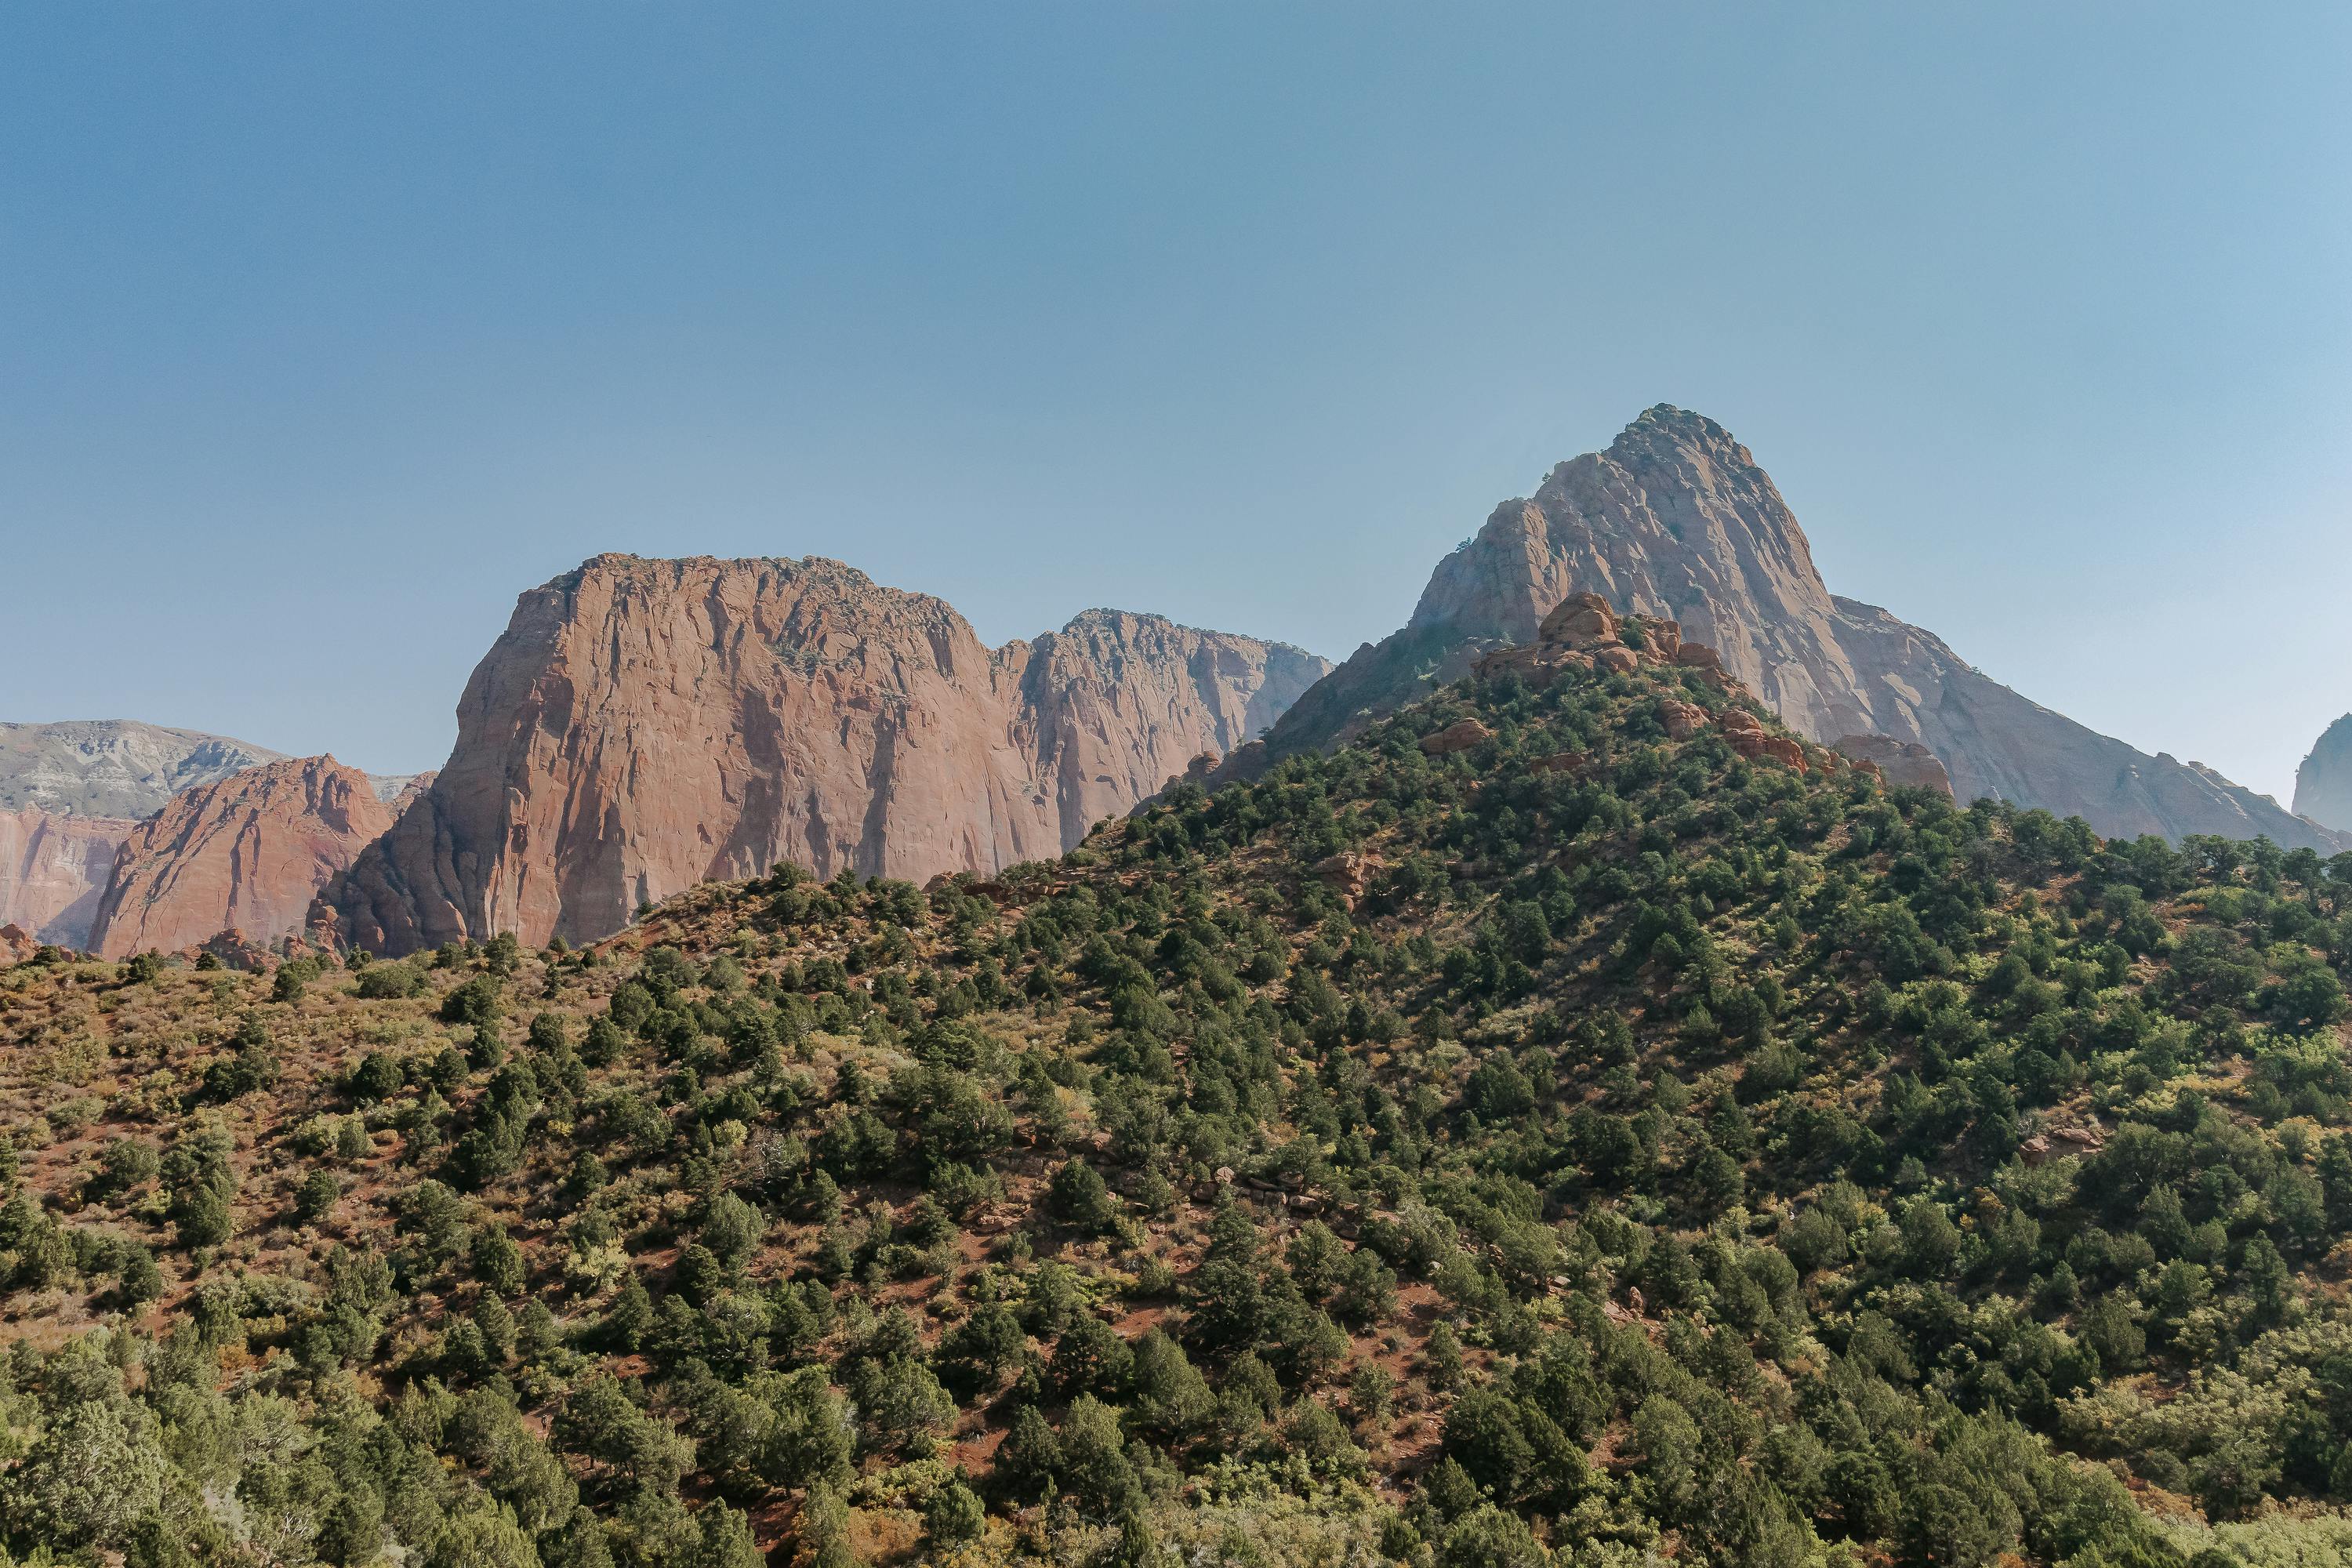 Scenic view of hills in Zion National Park.